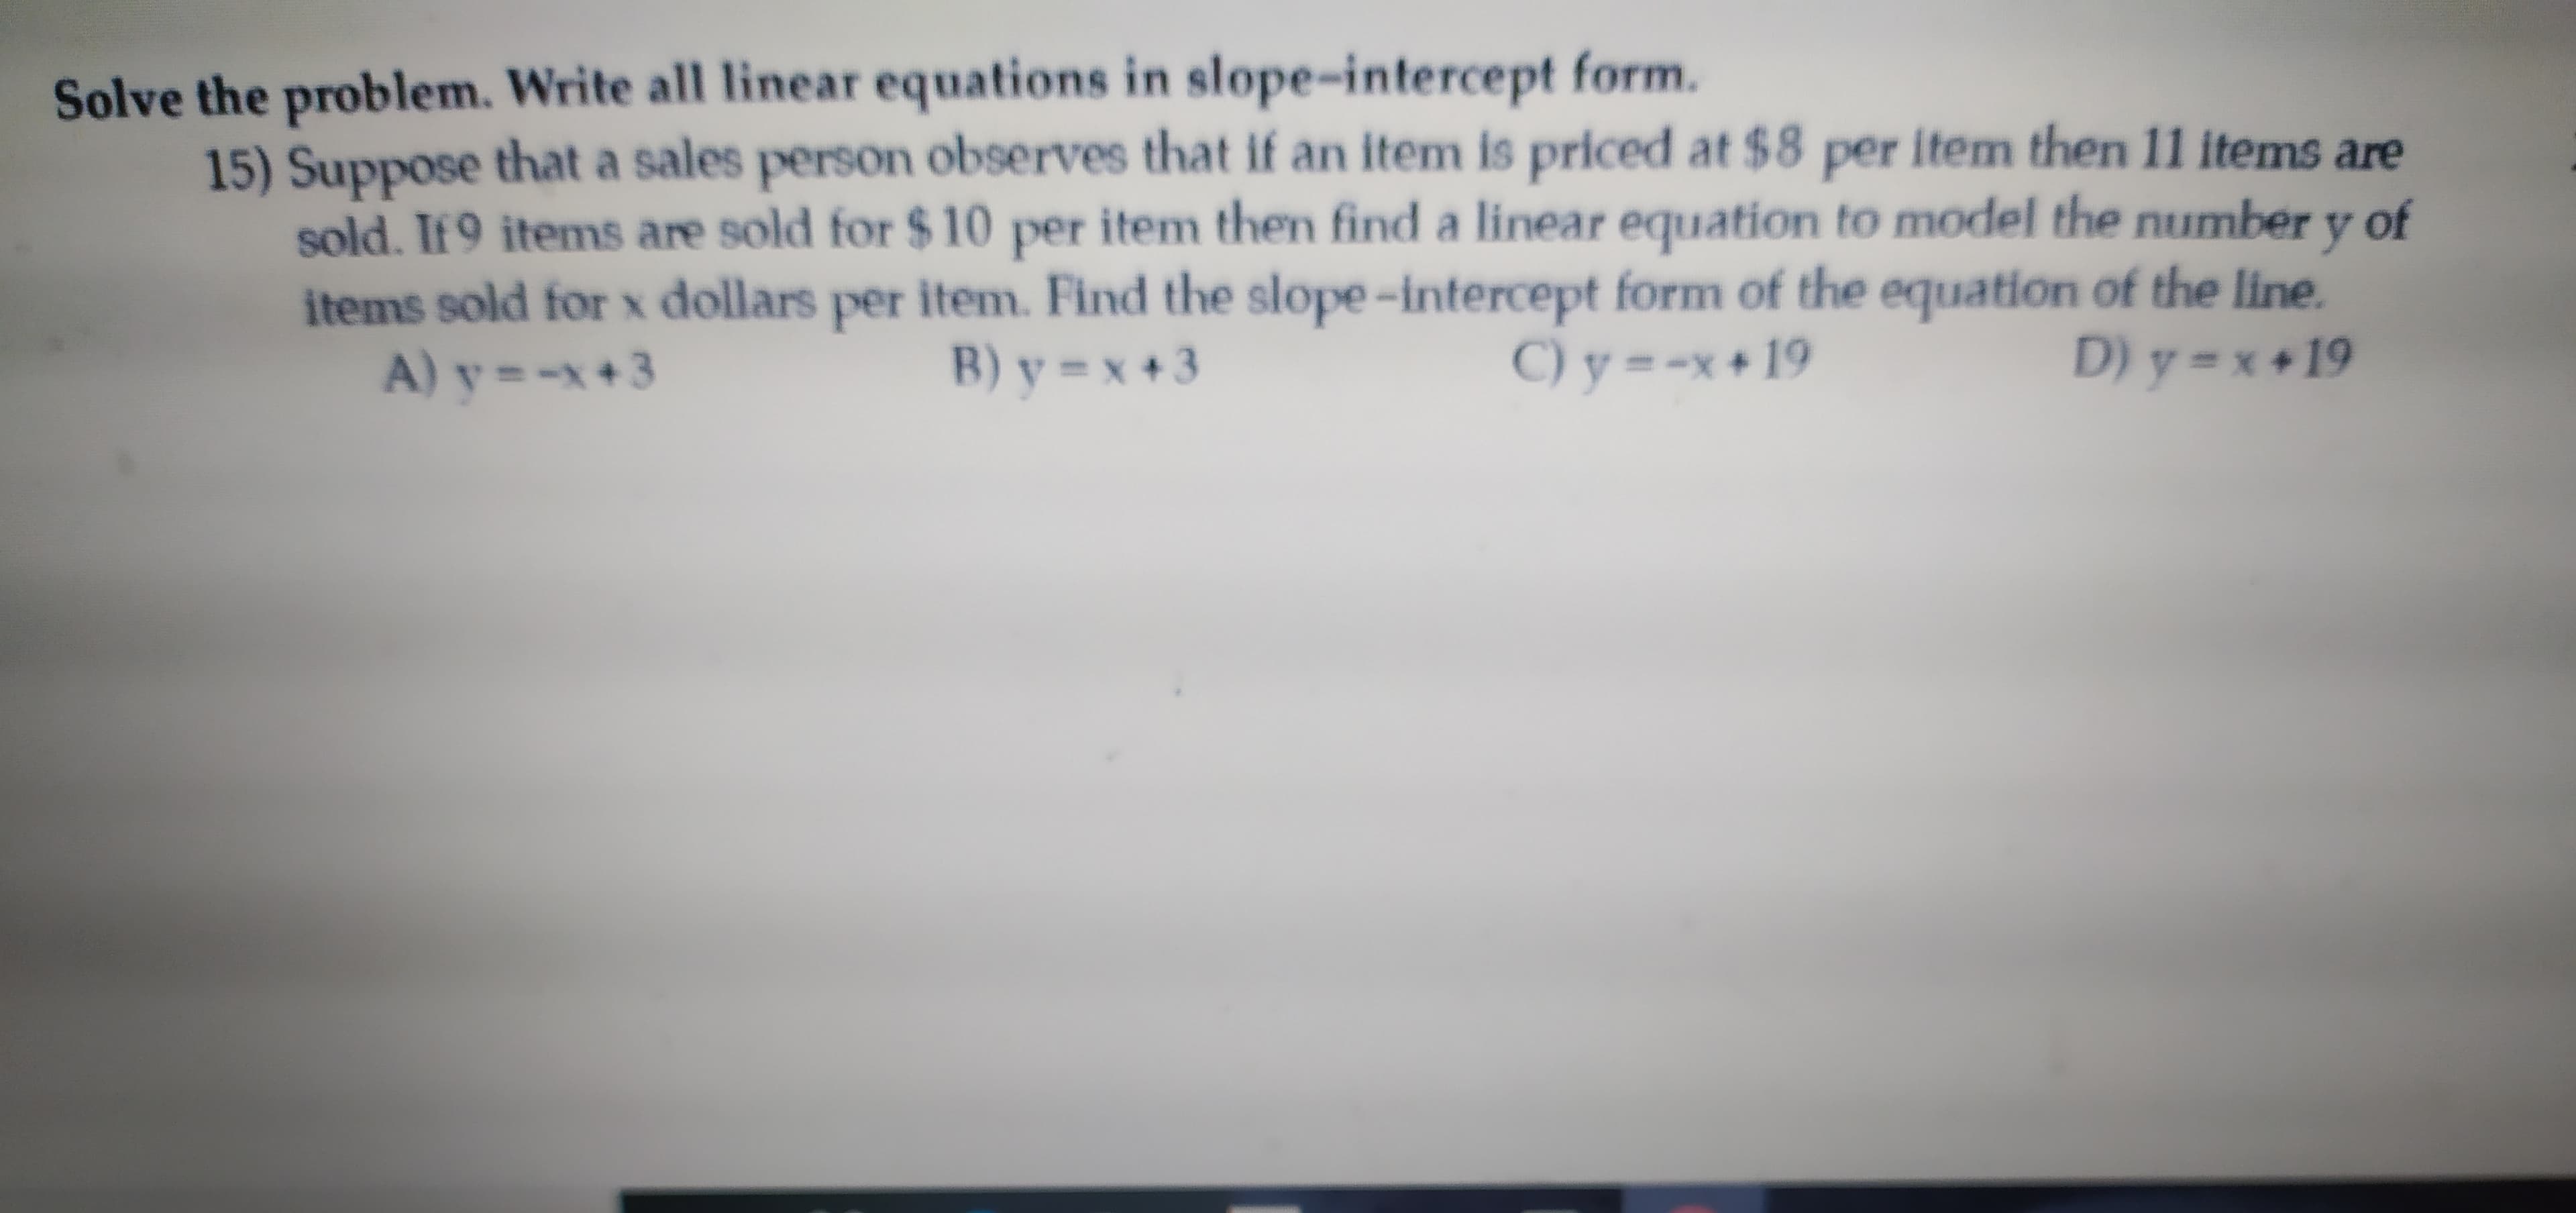 Solve the problem. Write all linear equations in slope-intercept form.
15) Suppose that a sales person observes that if an item is priced at $8 per item then 11 items are
sold. If 9 items are sold for $ 10 per item then find a linear equation to model the number y of
items sold for x dollars per item. Find the slope-intercept form of the equation of the line.
A) y =-x+3
B) y = x +3
C) y =-x + 19
D) y=x +19
